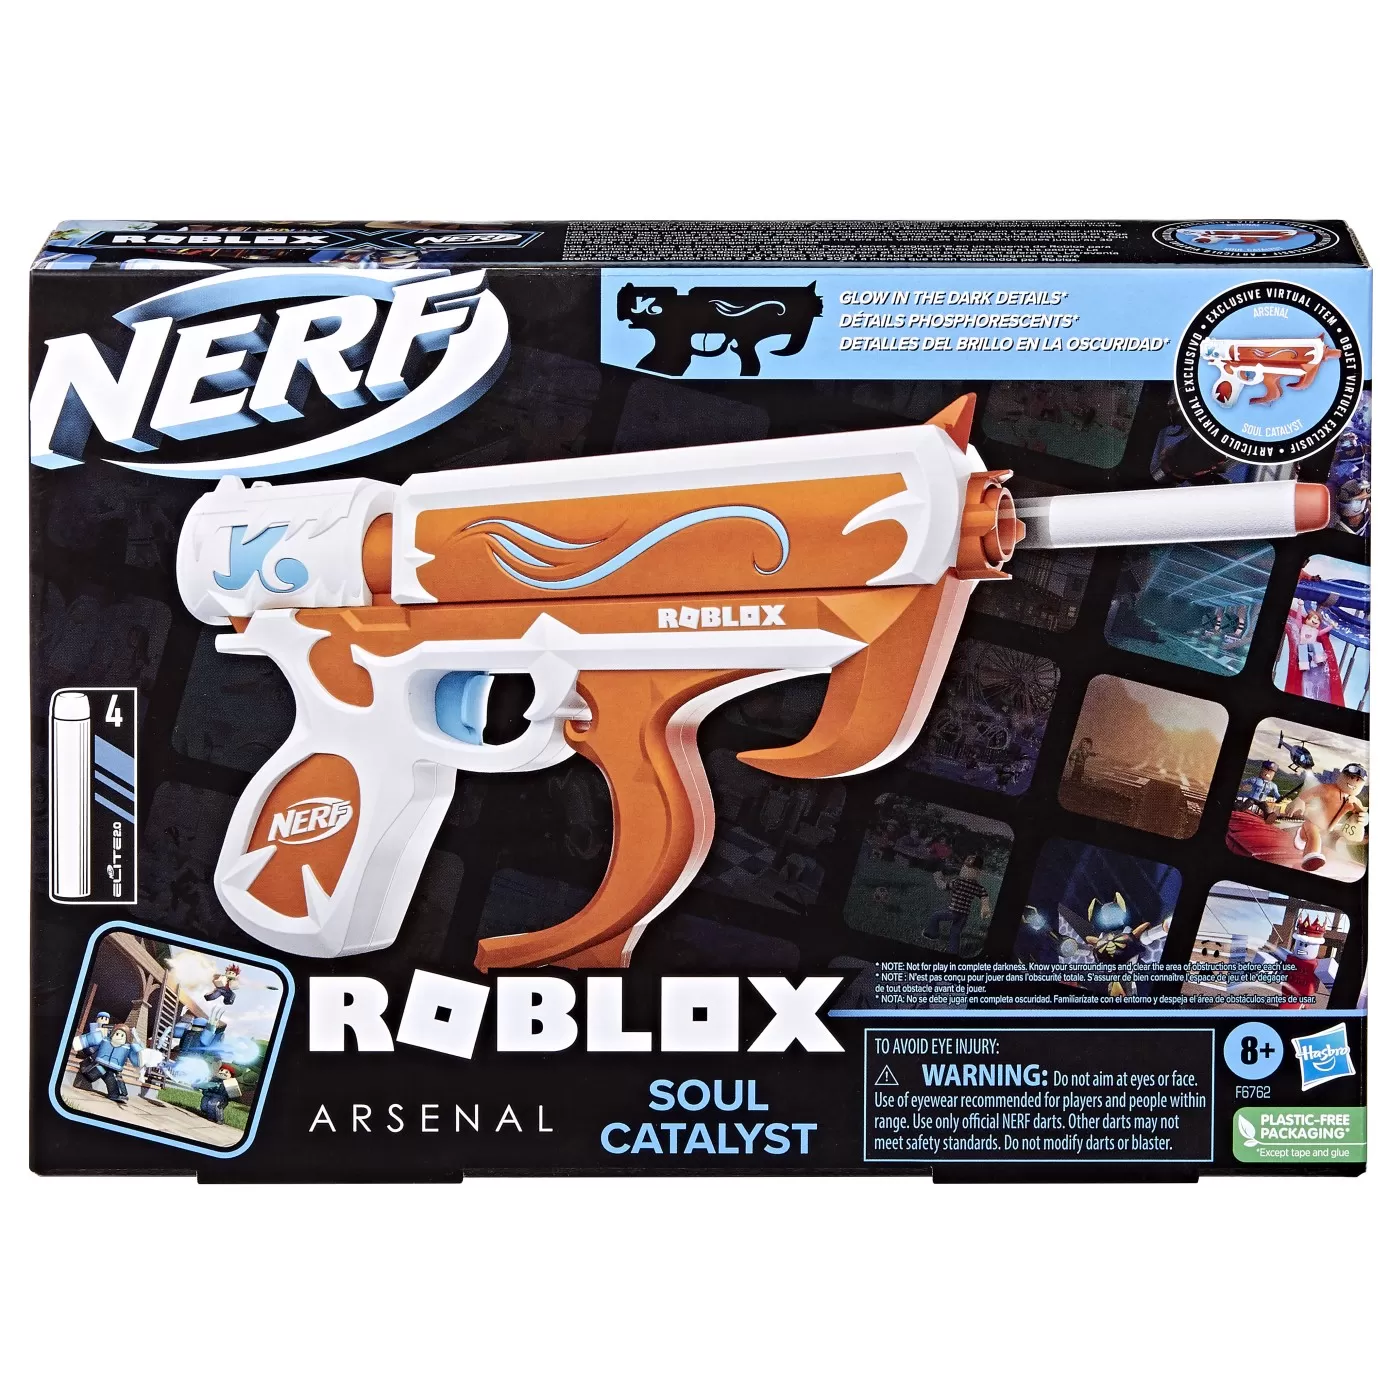 ⭐Blaster Nerf Roblox Arsenal Pulse Laser - buy in the online